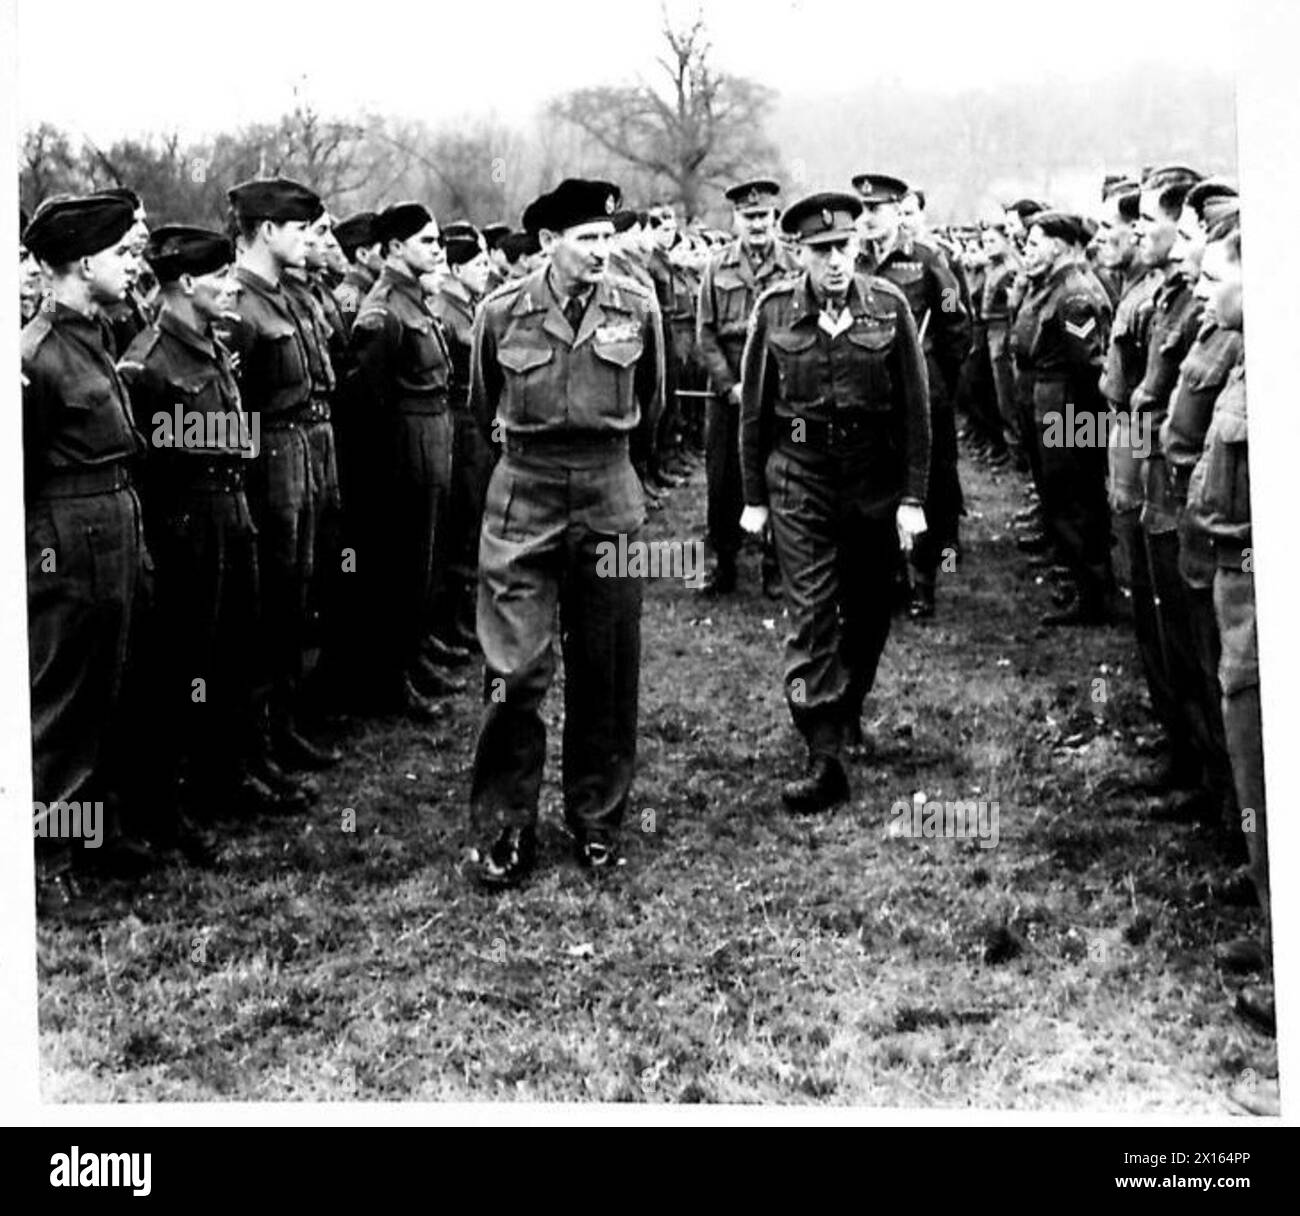 GENERAL MONTGOMERY'S TOUR OF ARMY UNITS - The C-in-C walking through the ranks of R.A.S.C., Maidstone. He is accompanied by Brigadier S.O.Jones, OBE.,DSO., followed by Major General R.K. Ross, DSO.,MC., and Lieutenant General N.M. Ritchire, CBE.,DSO.,MC British Army Stock Photo